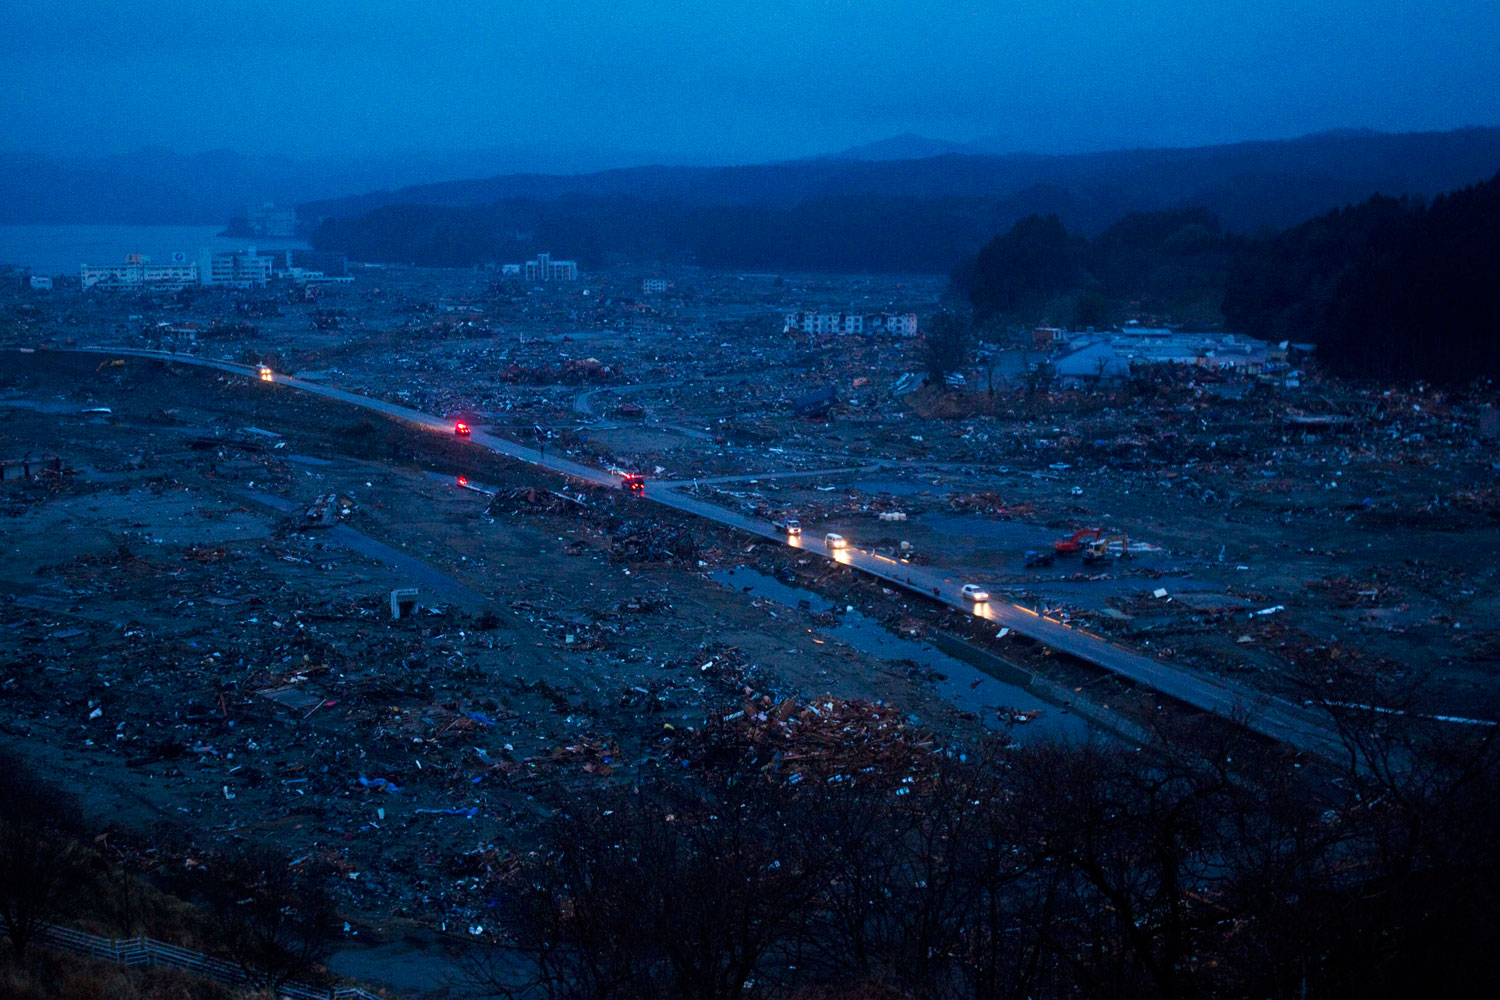 Japanese vehicles pass through the ruins of the leveled city of Minamisanriku, in northeastern Japan, March 15, 2011.